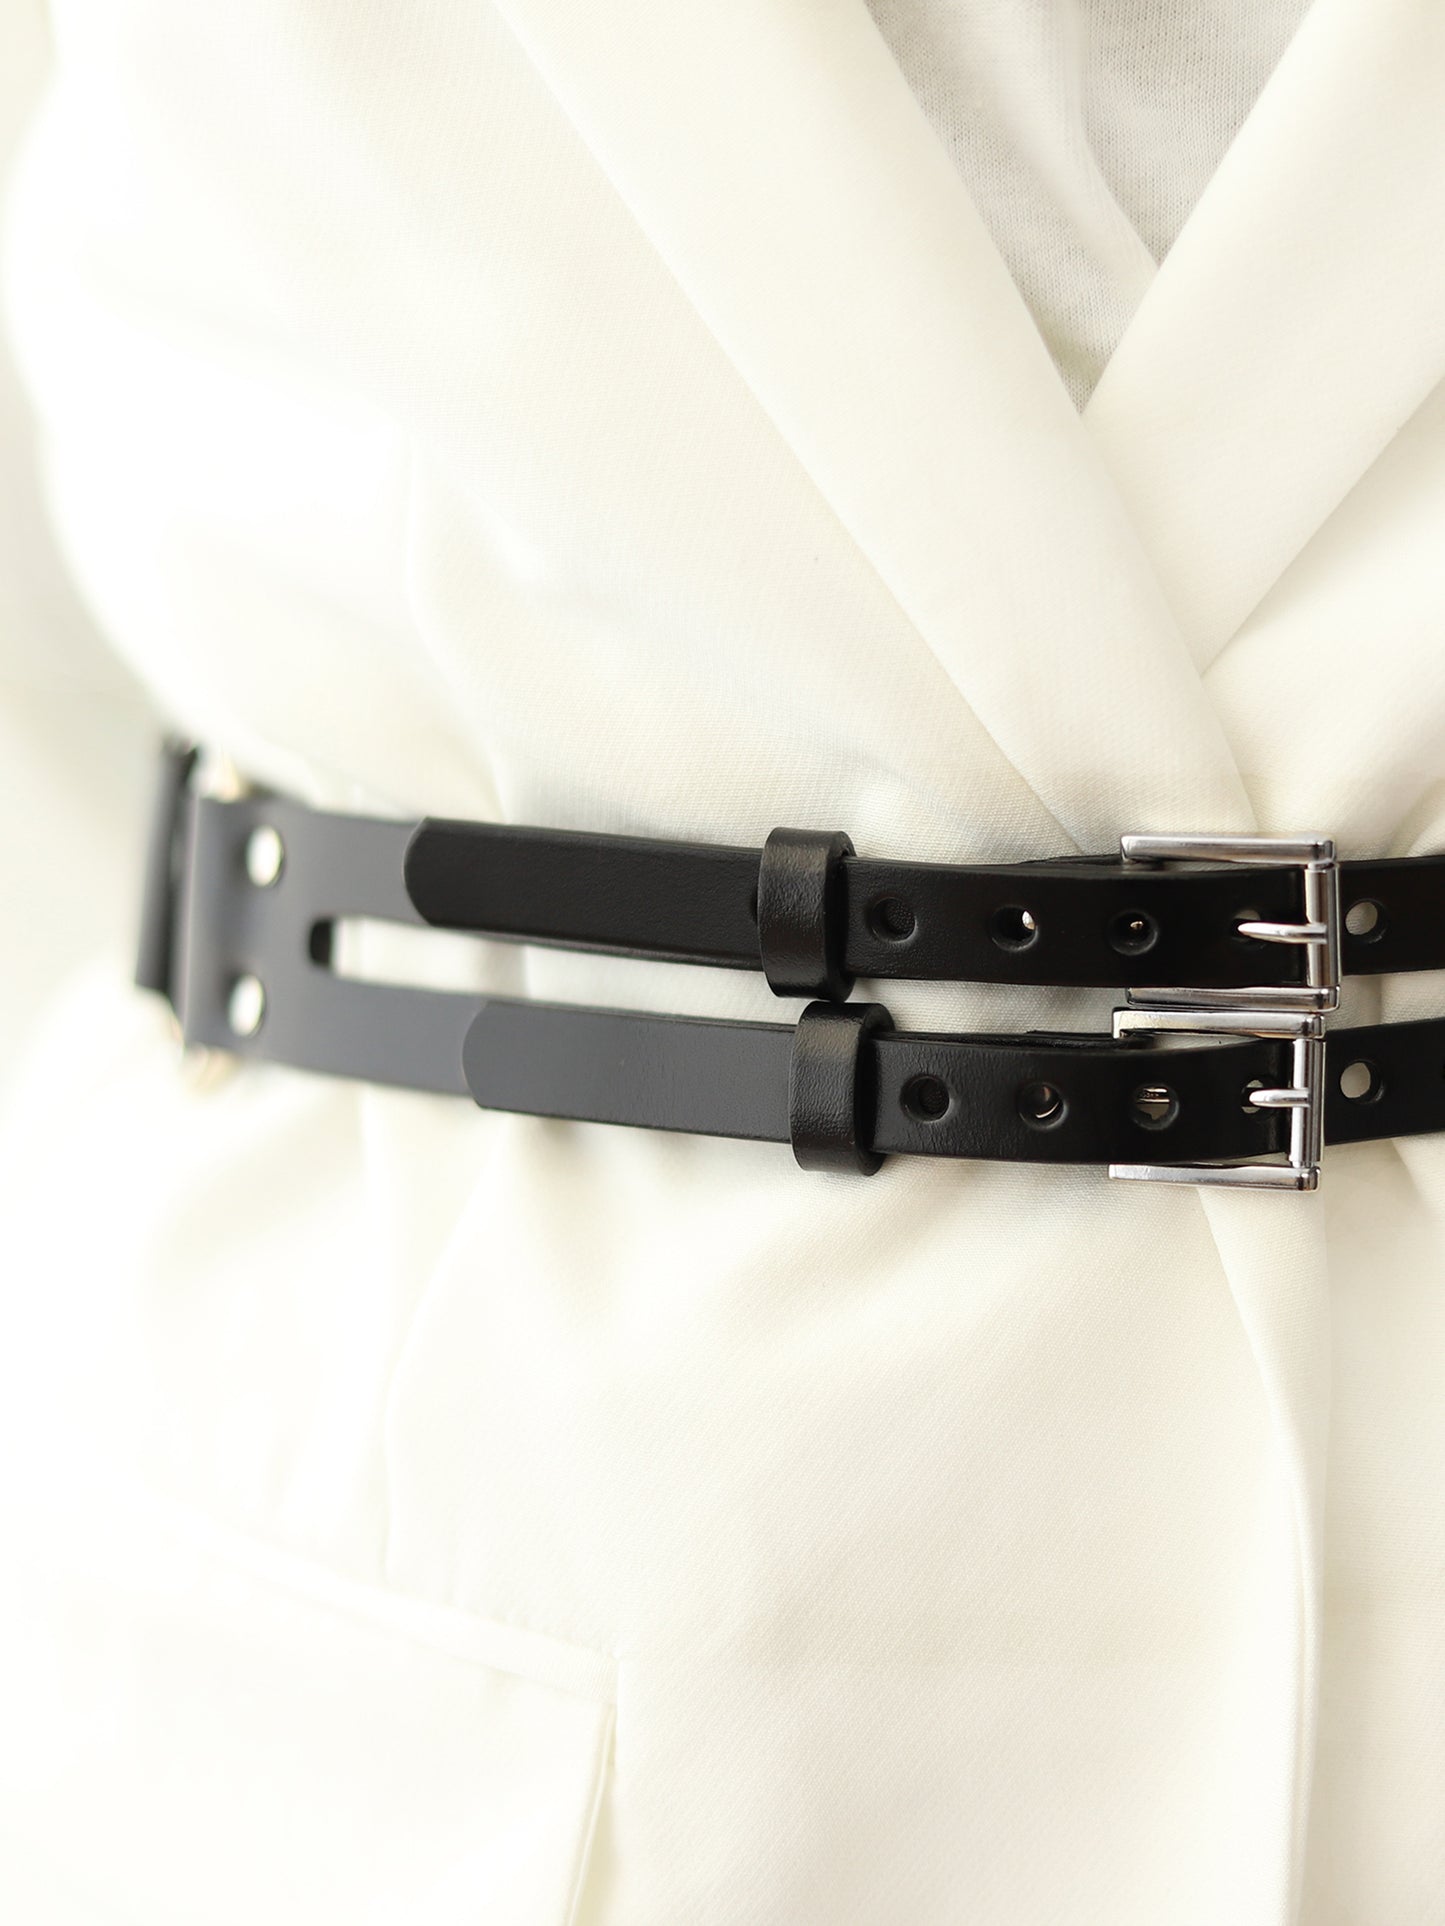 Detailed view of double buckle harness belt.